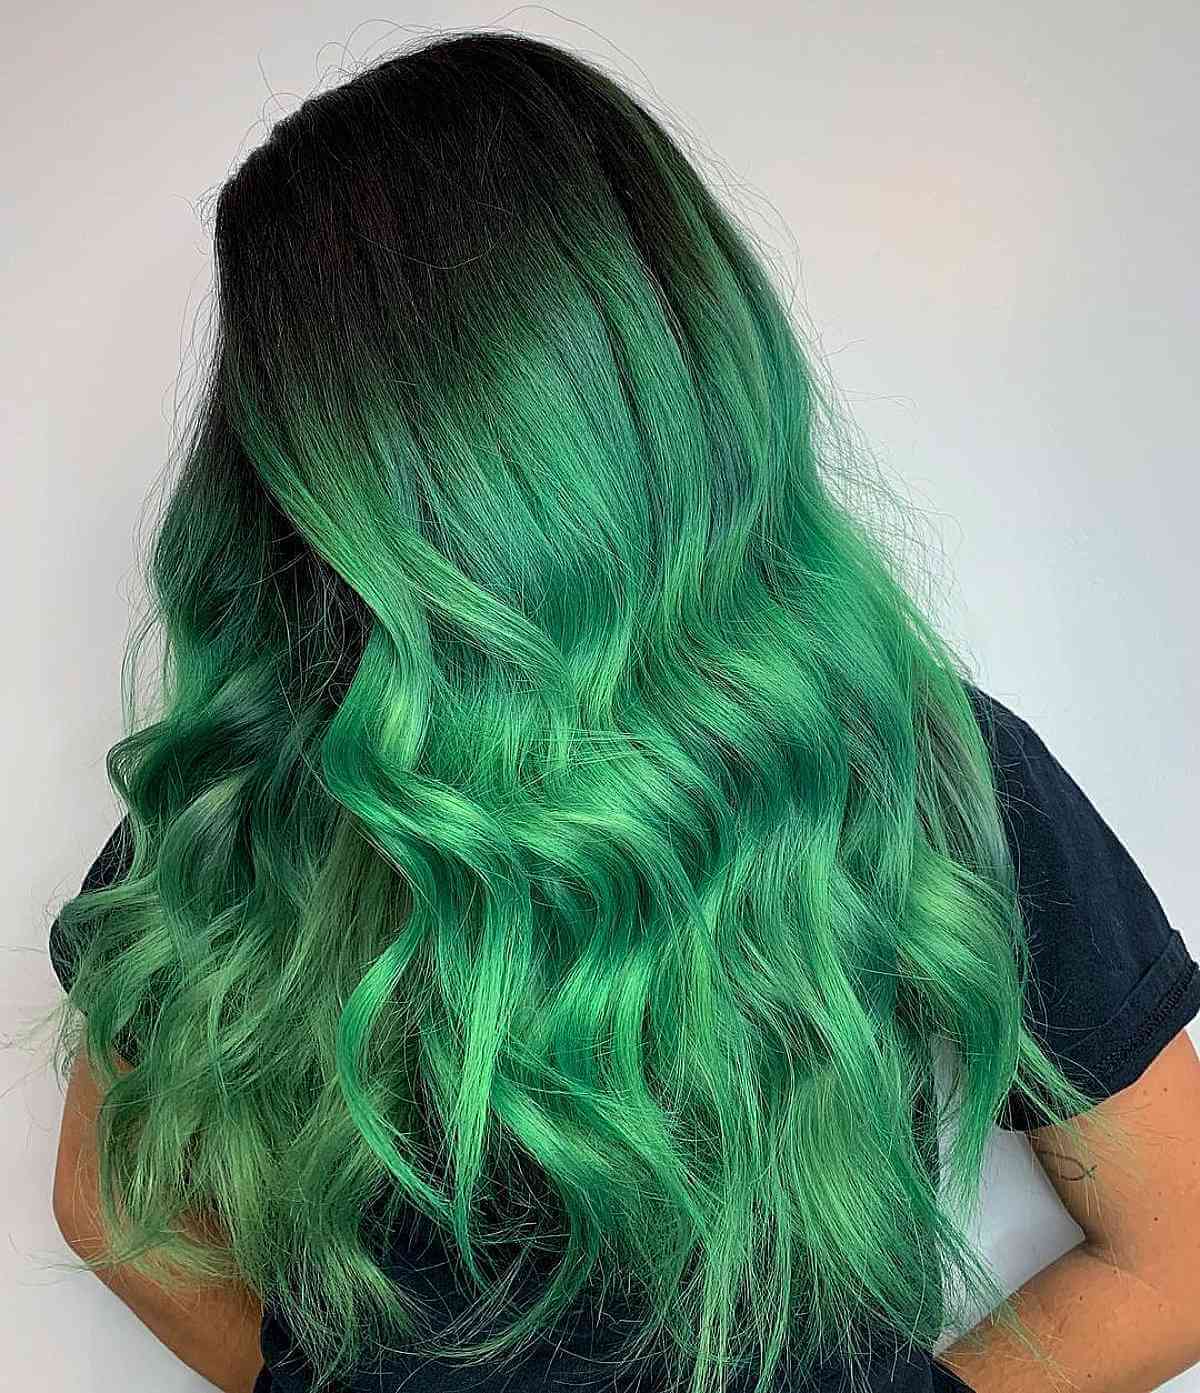 Incredible long, thick green hair with dark roots.